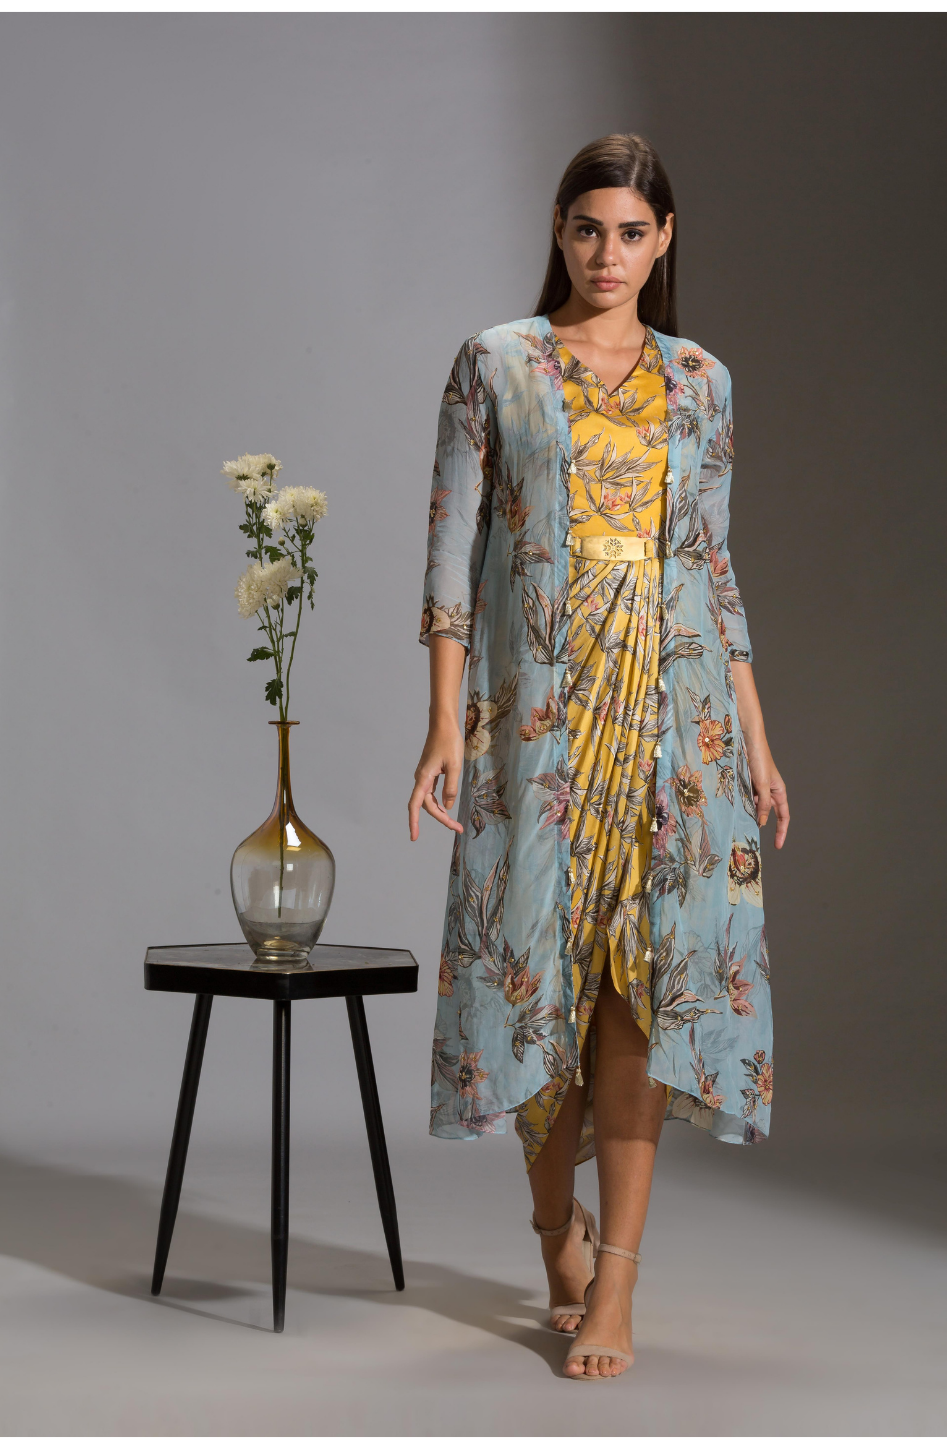 Image of LONG DRAPE DRESS WITH LONG JACKET. From savoirfashions.com